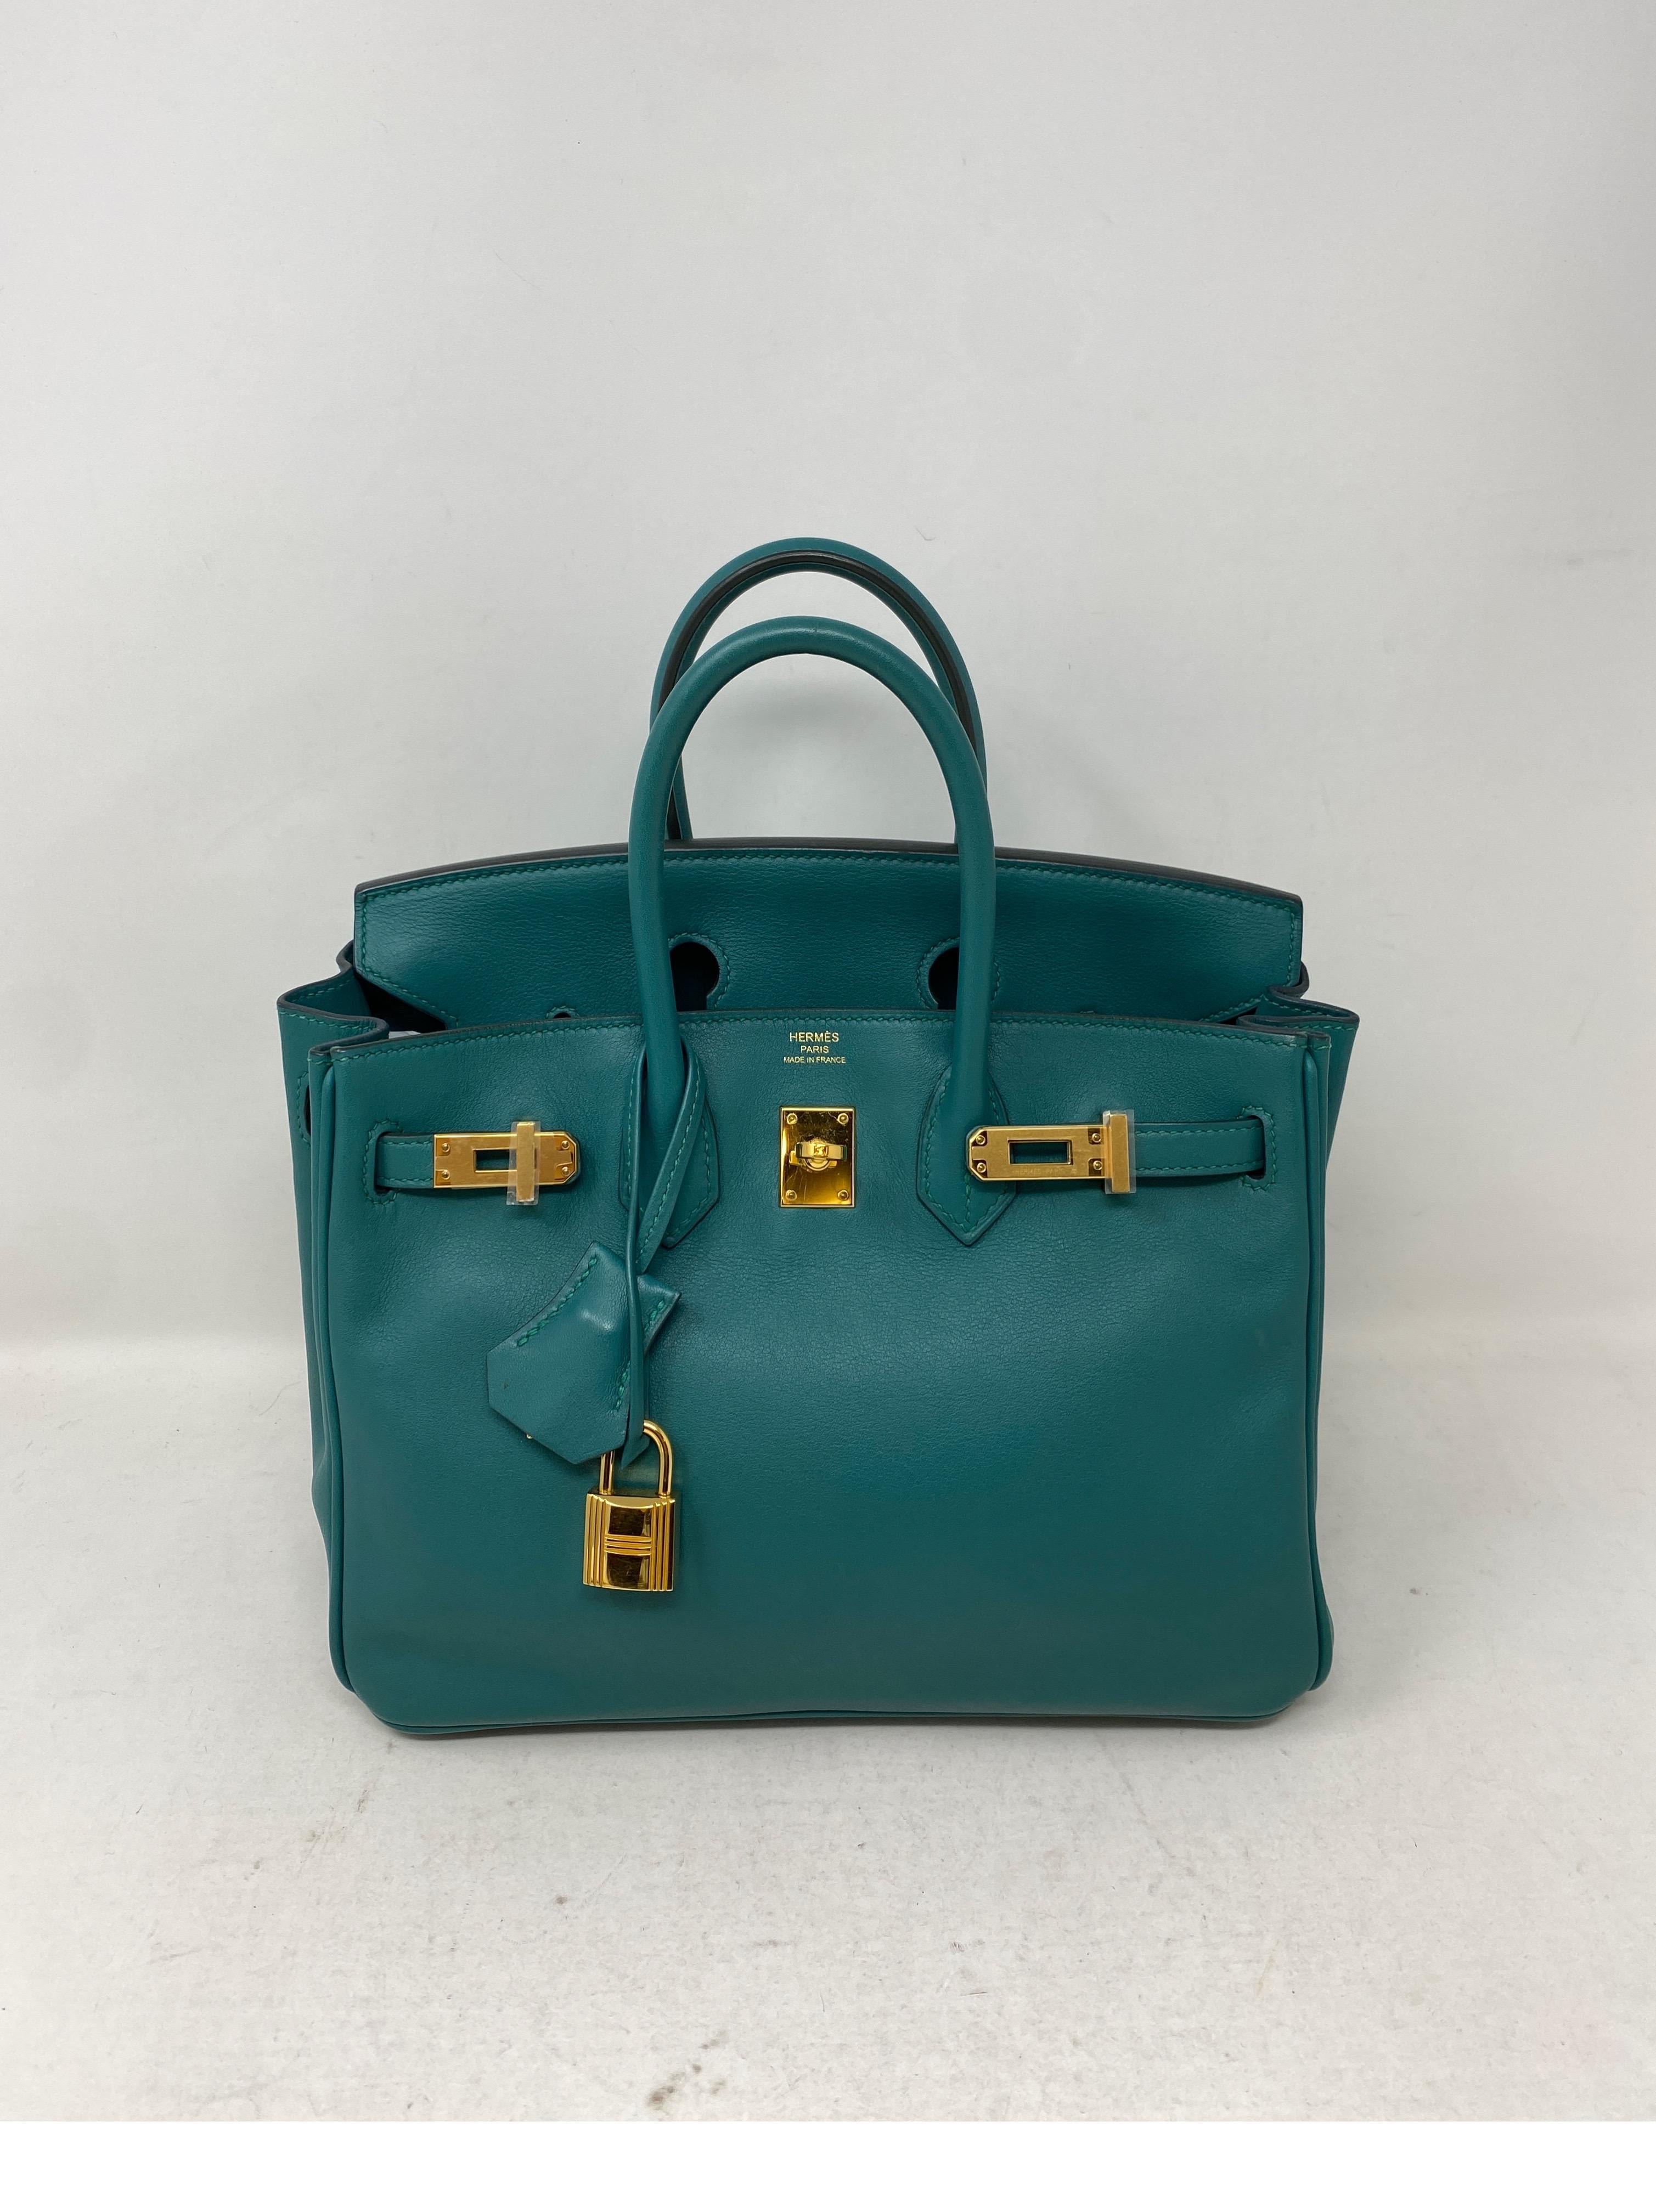 Hermes Malachite Birkin 25 Bag. Beautiful and rare color green with gold hardware. Rarest size 25. Unicorn bag. Swift leather. Plastic still on hardware. Looks brand new. From 2017. Includes clochette, lock, keys, and dust cover. Guaranteed